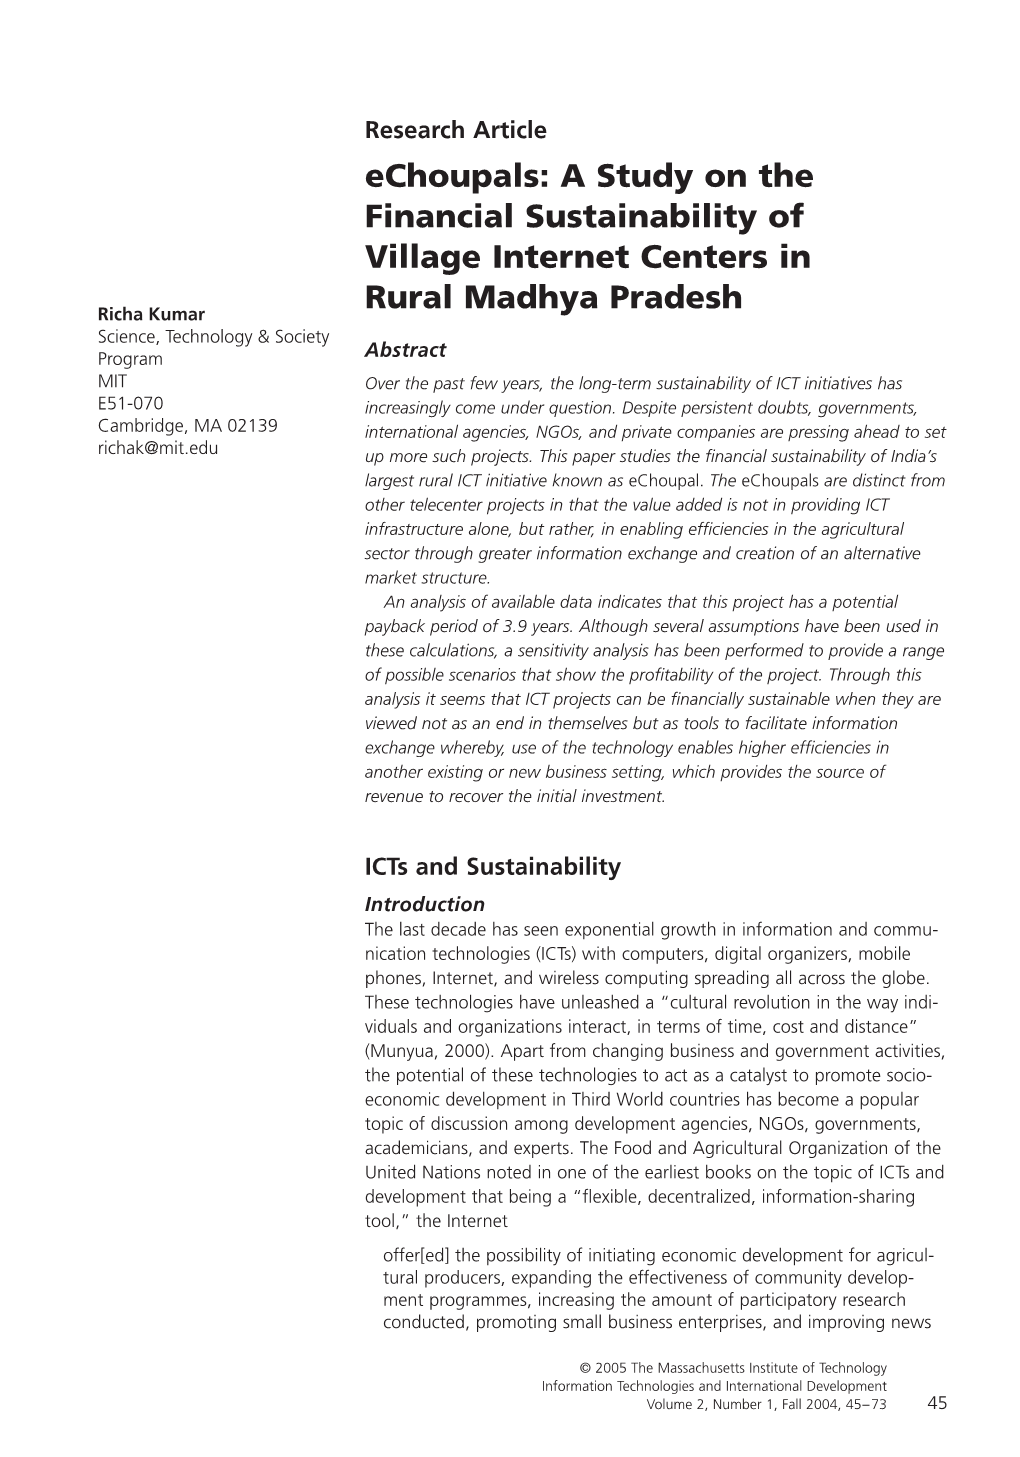 Echoupals: a Study on the Financial Sustainability of Village Internet